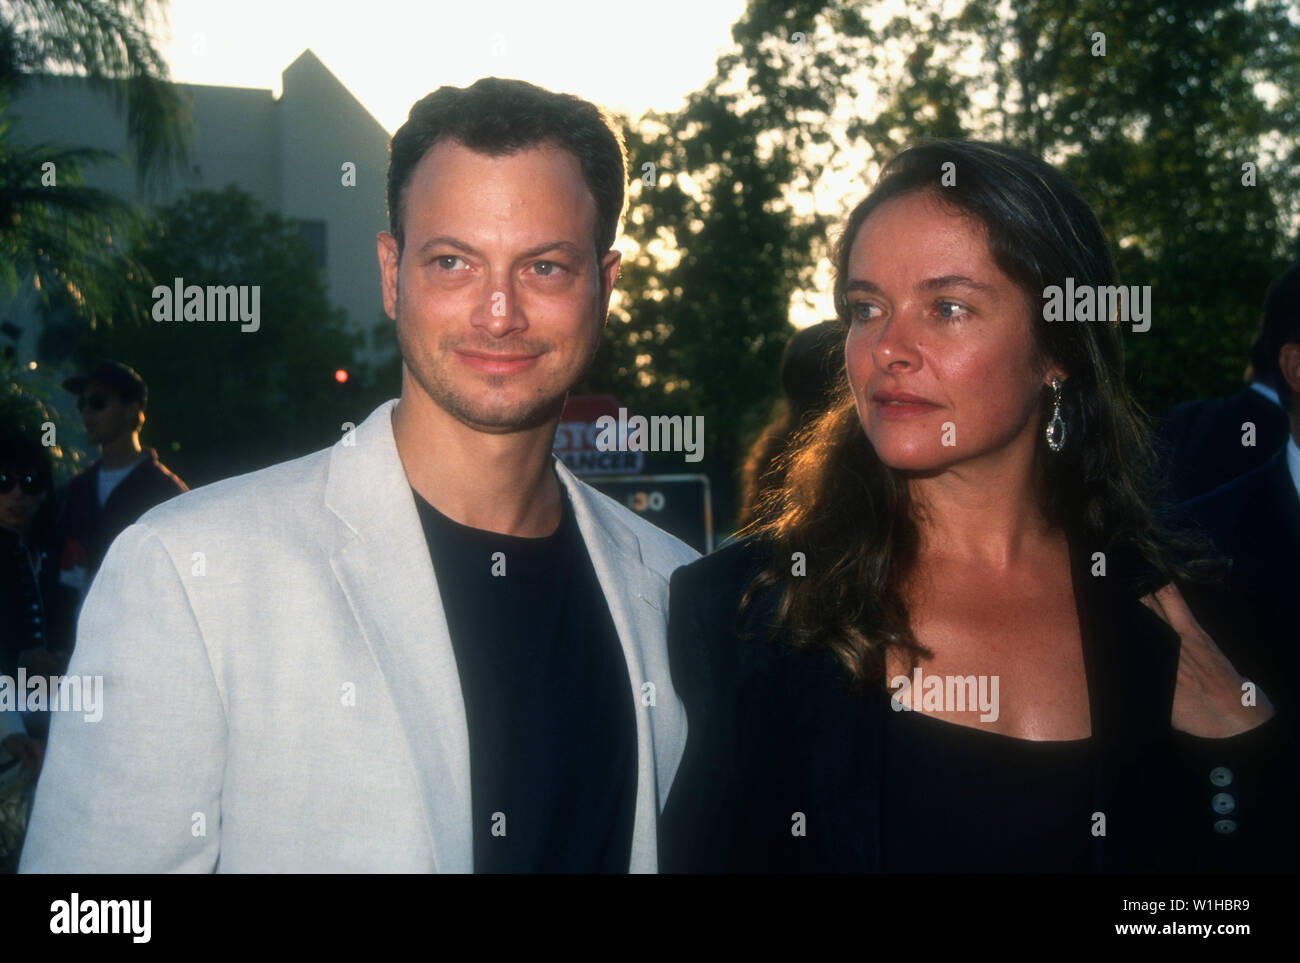 Hollywood, California, USA 3rd August 1994 Actor Gary Sinise and wife actress Moira Harris attend the 'Clear and Present Danger' Hollywood Premiere on August 3, 1994 at Paramount Pictures Studios in Hollywood, California, USA. Photo by Barry King/Alamy Stock Photo Stock Photo